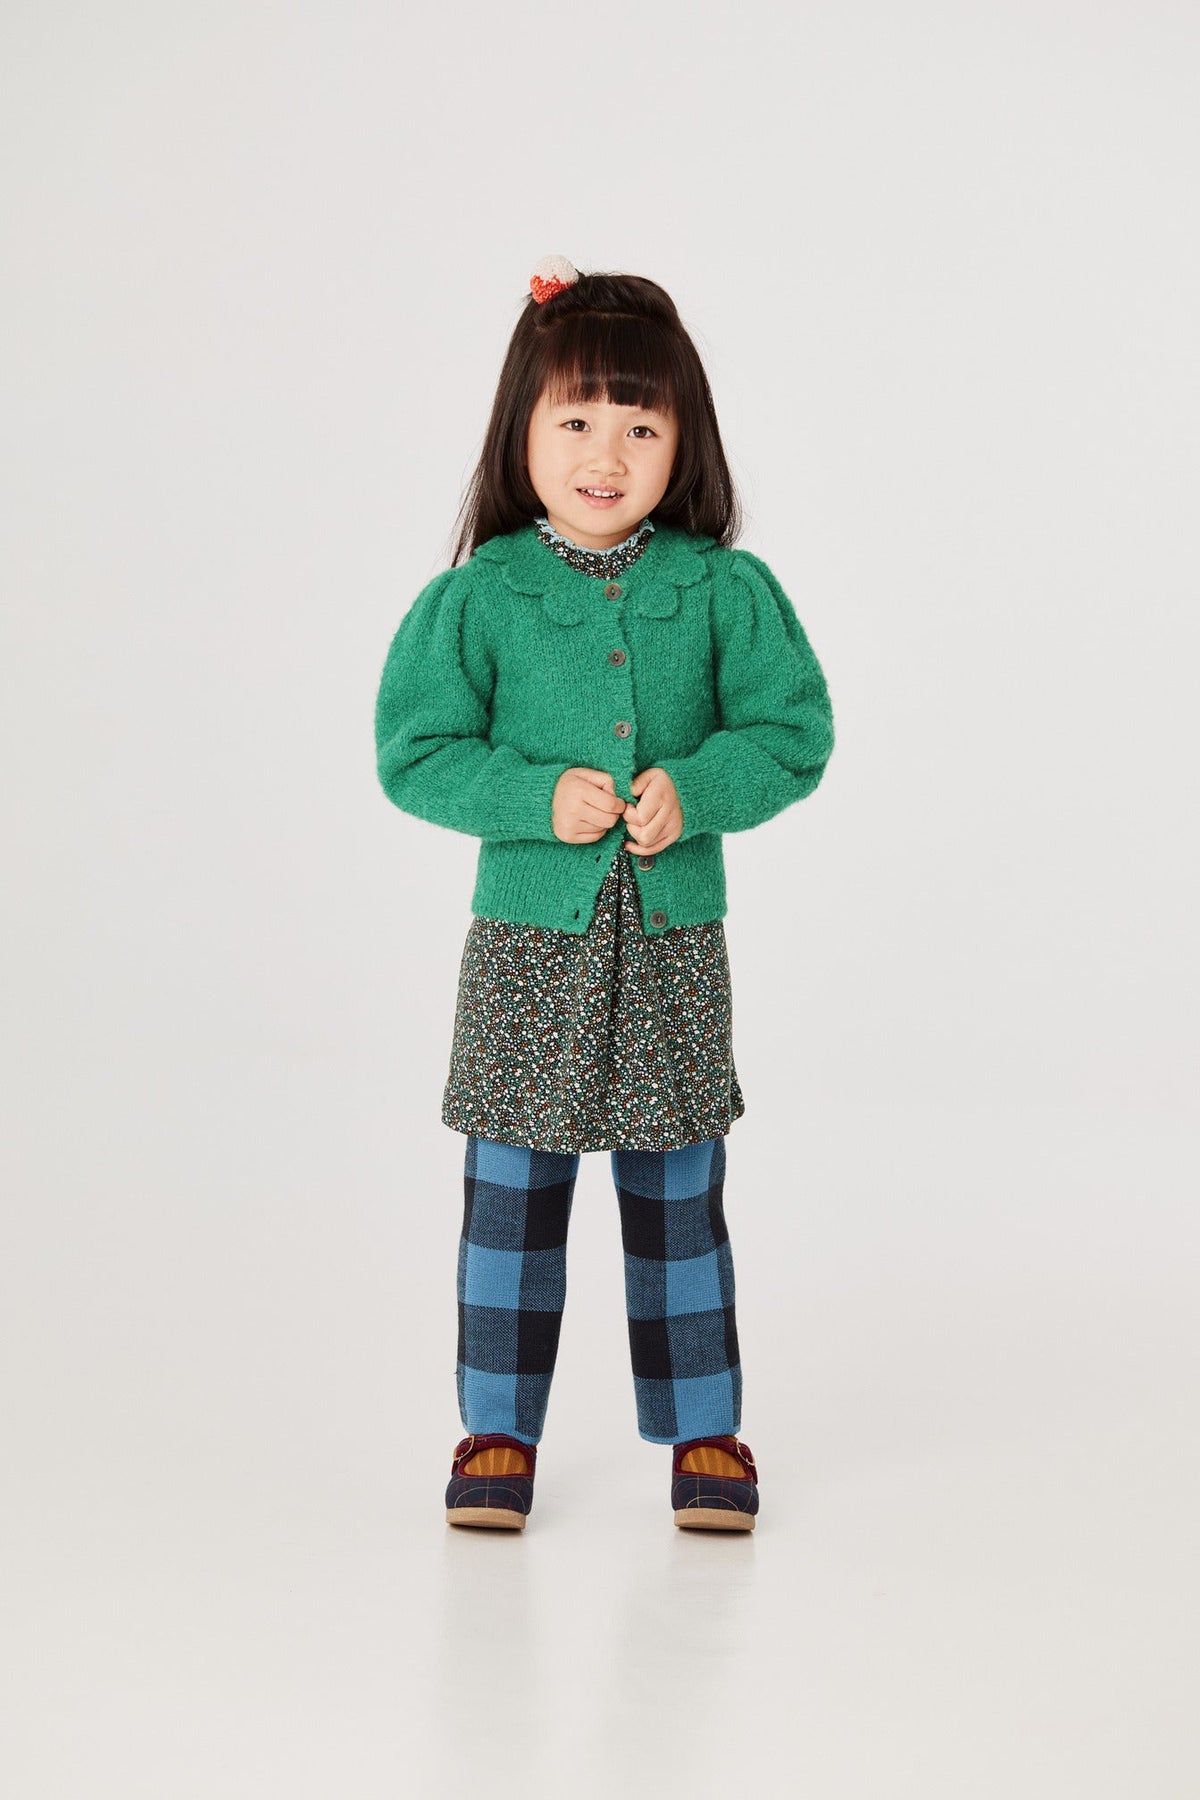 Boucle Flower Ellie Cardigan - Emerald+Model is 41 inches tall, 38lbs, wearing a size 4-5y